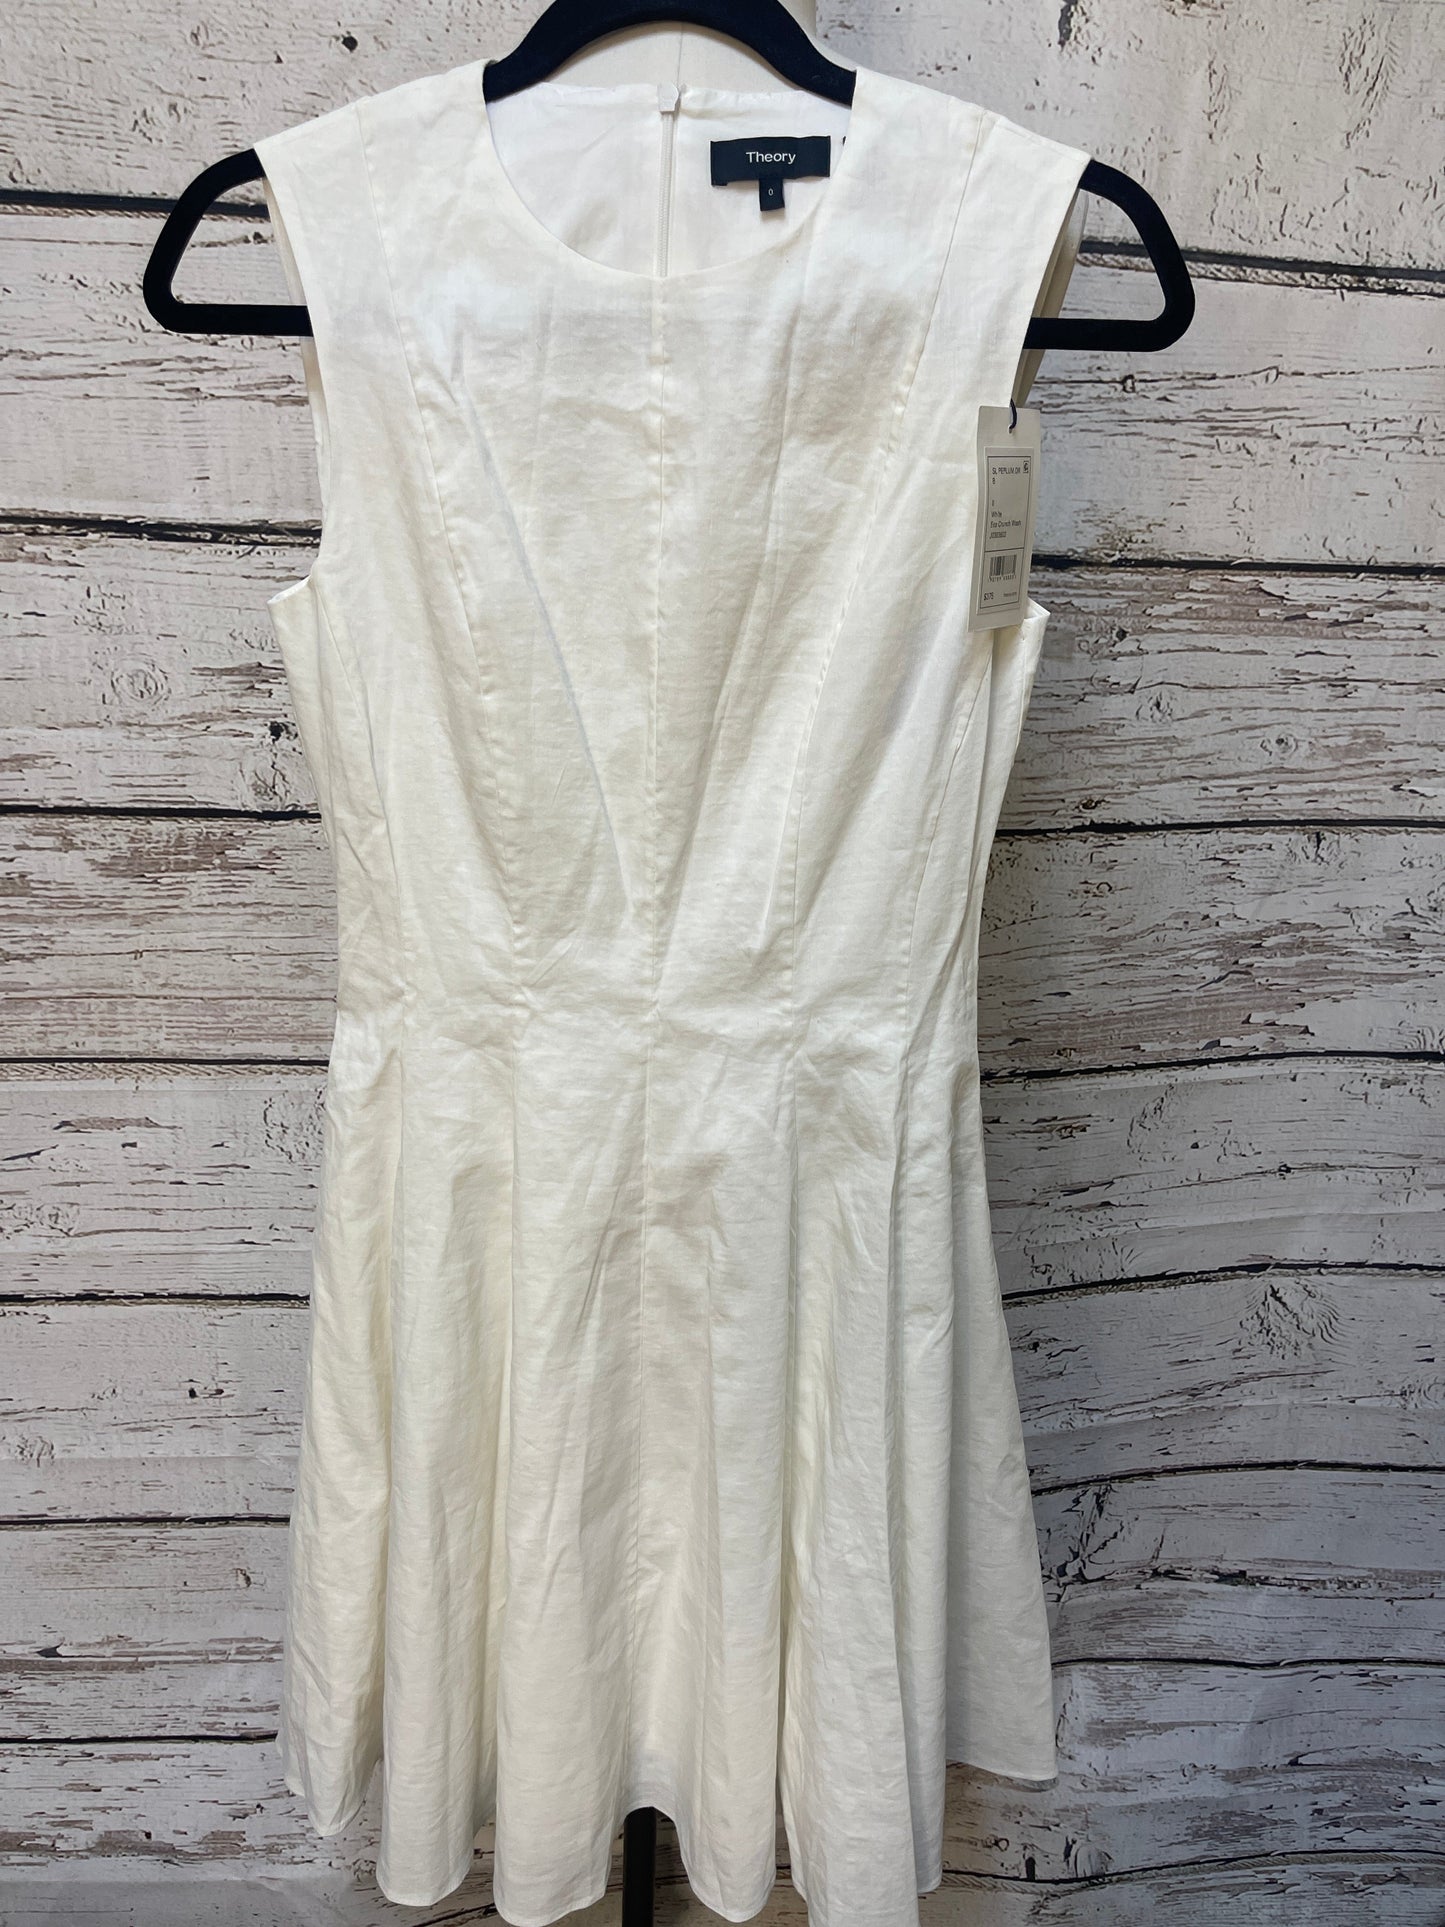 White Dress Casual Short Theory, Size 0